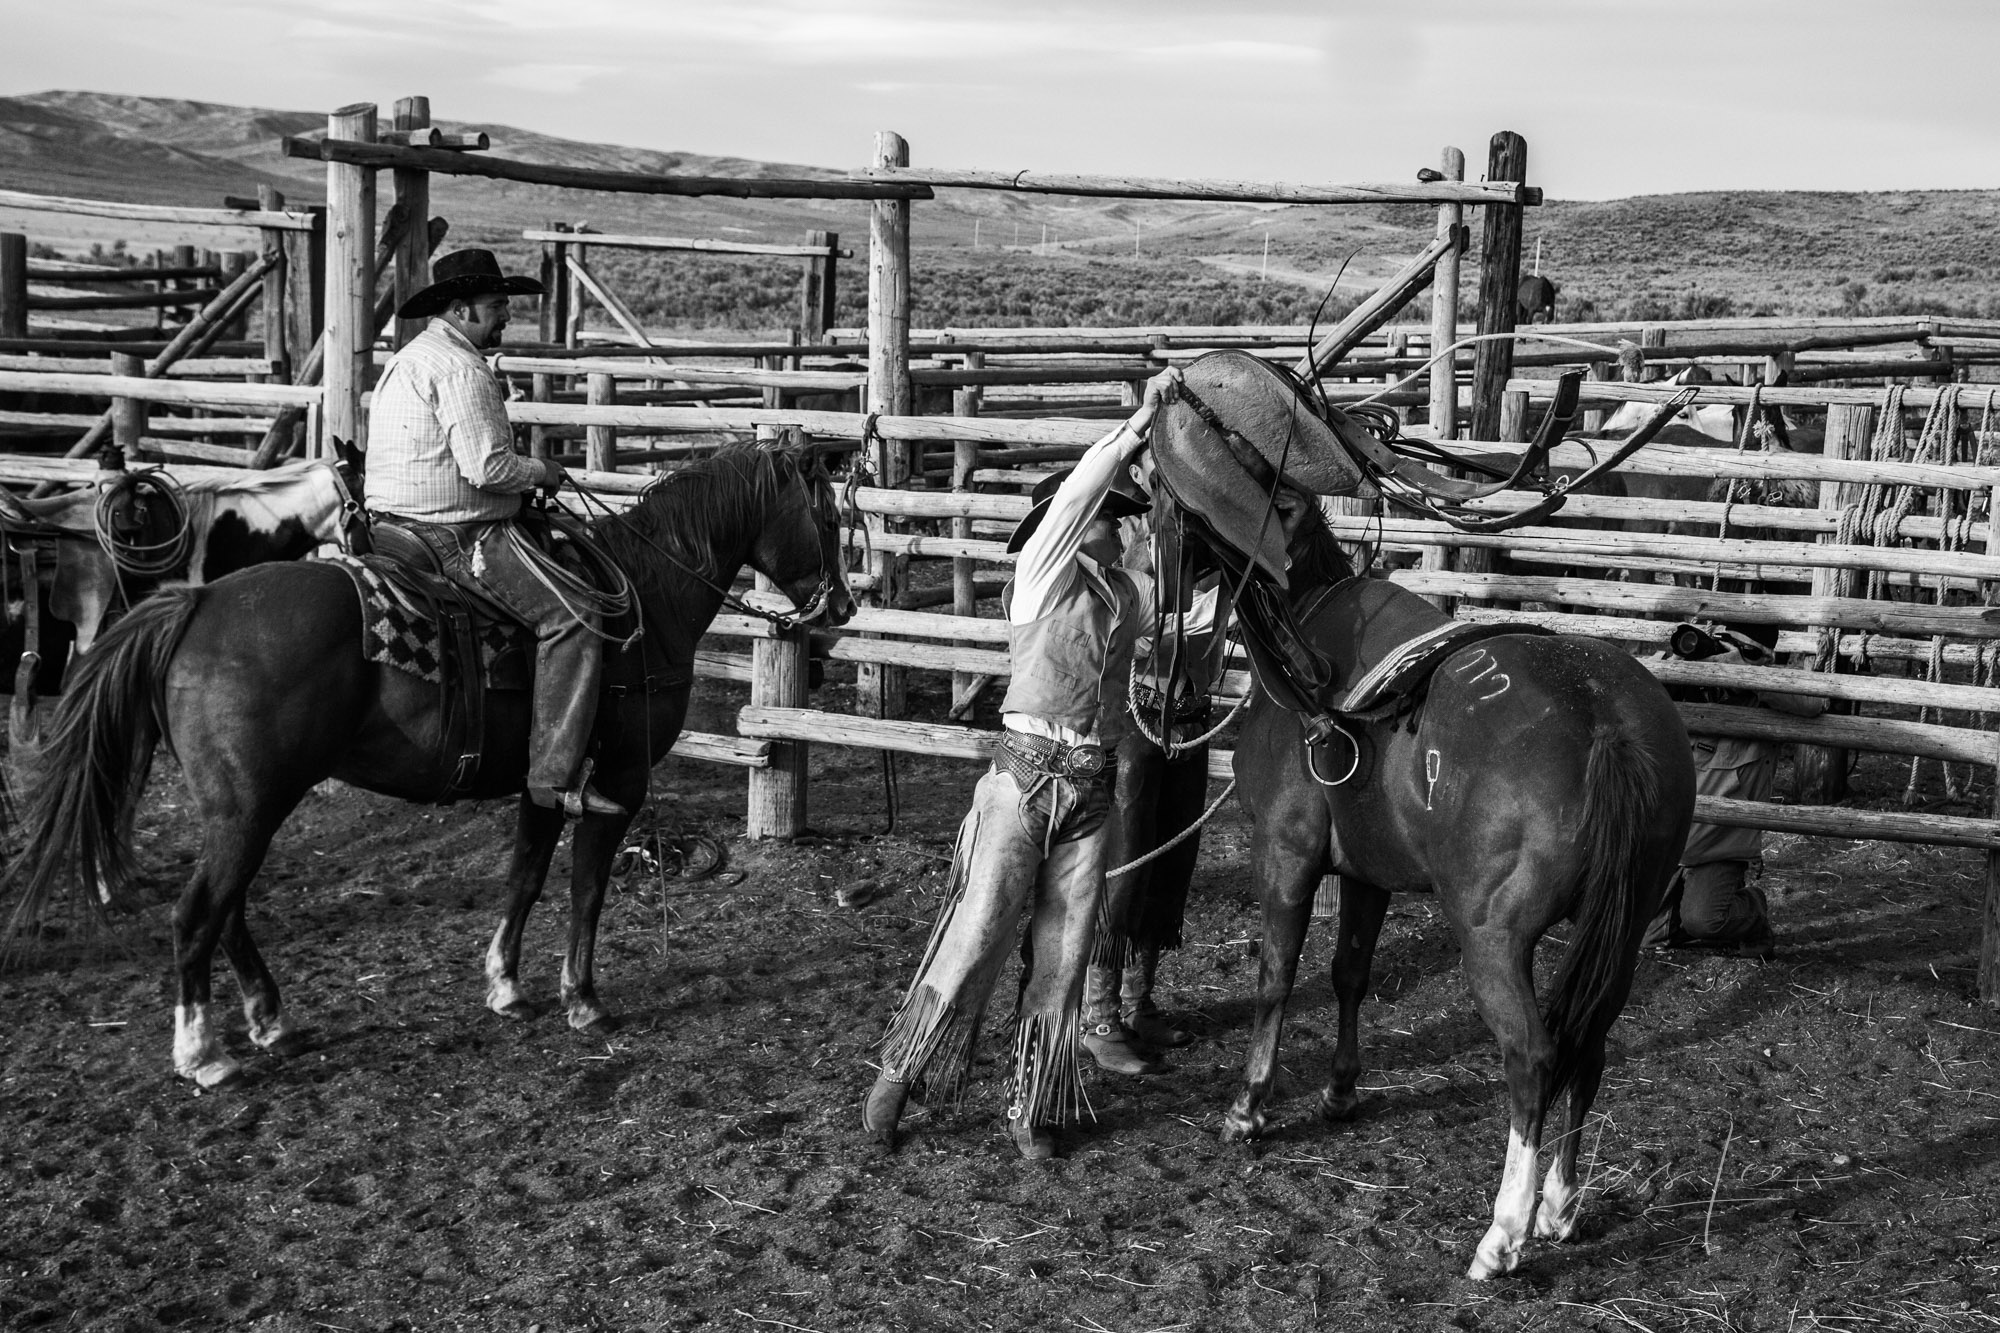 Fine Art Limited Edition Photo Prints of Cowboys, Horses, and life in the West. Saddle Uo. A Cowboy picture in black and white...